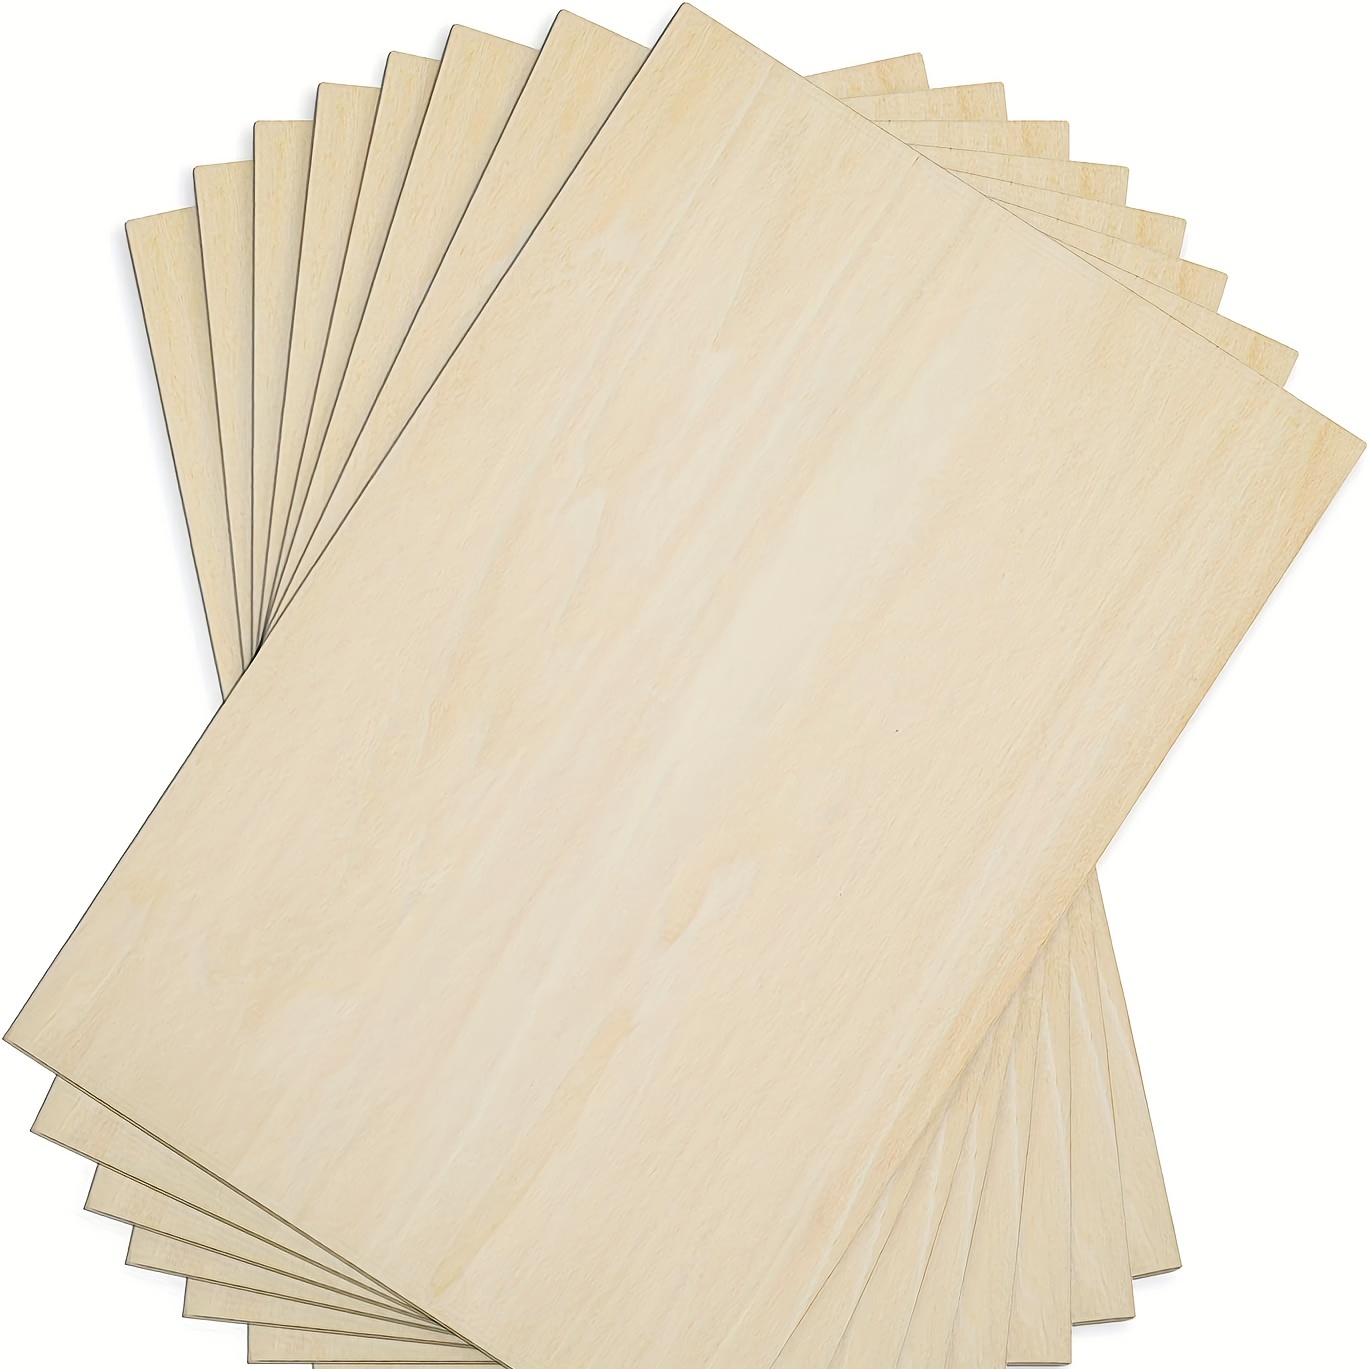 Namalu 10 Pack Balsa Wood Sheets 12 x 4 Inches Unfinished Wooden Board Wood  Sheets for Crafts House Aircraft Ship Boat Arts School Projects DIY Wooden